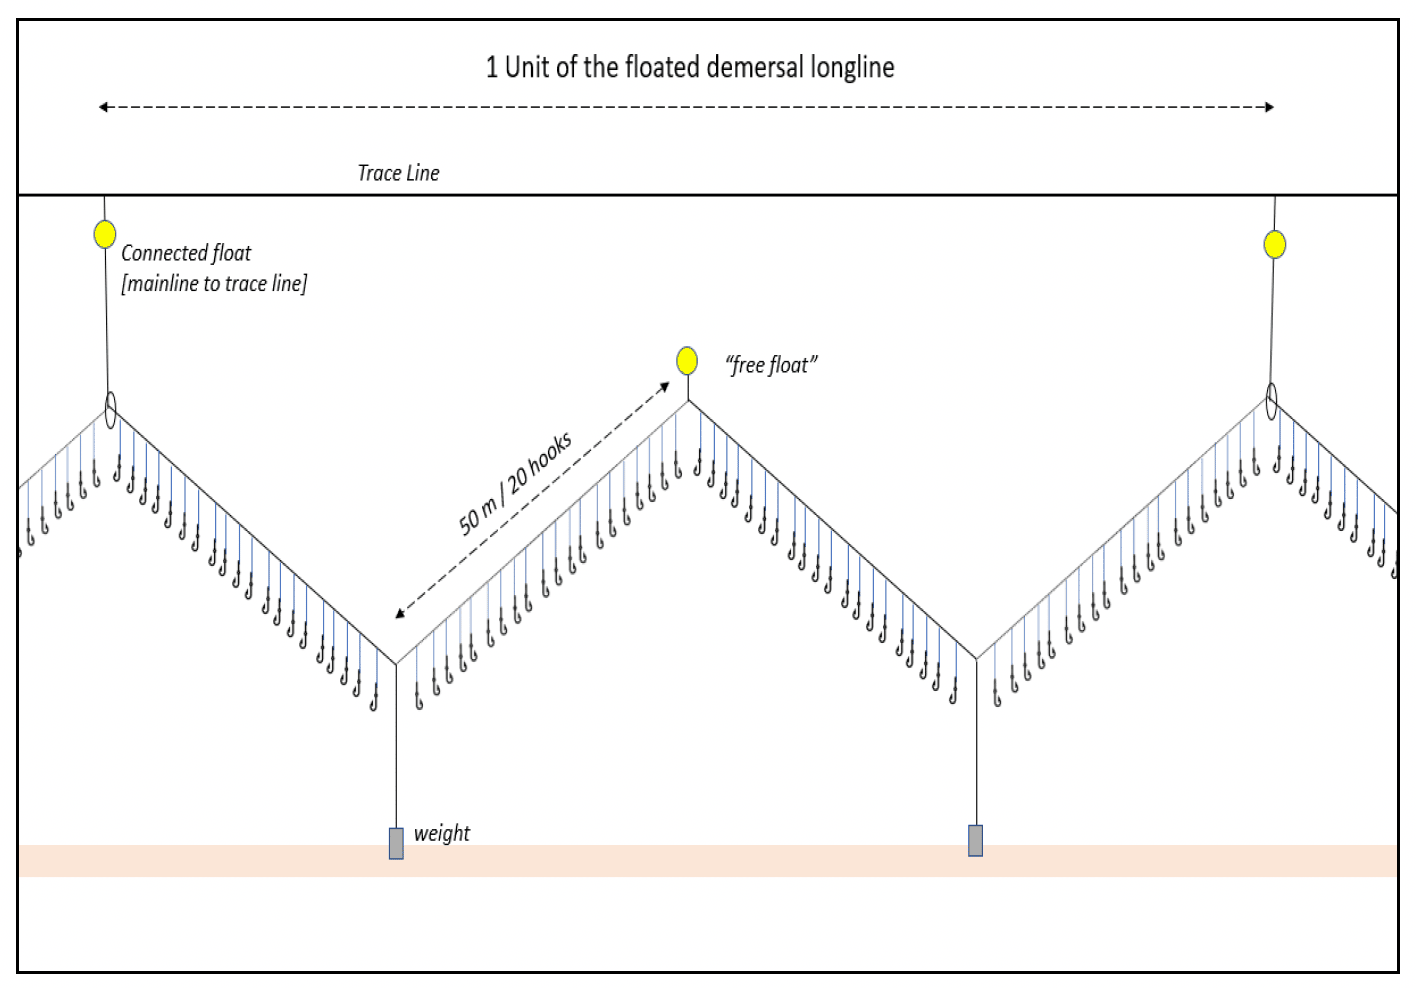 Schematic representation of the way in which a longline is alternately weighted and floated such that it zig-zags up and down through the water column